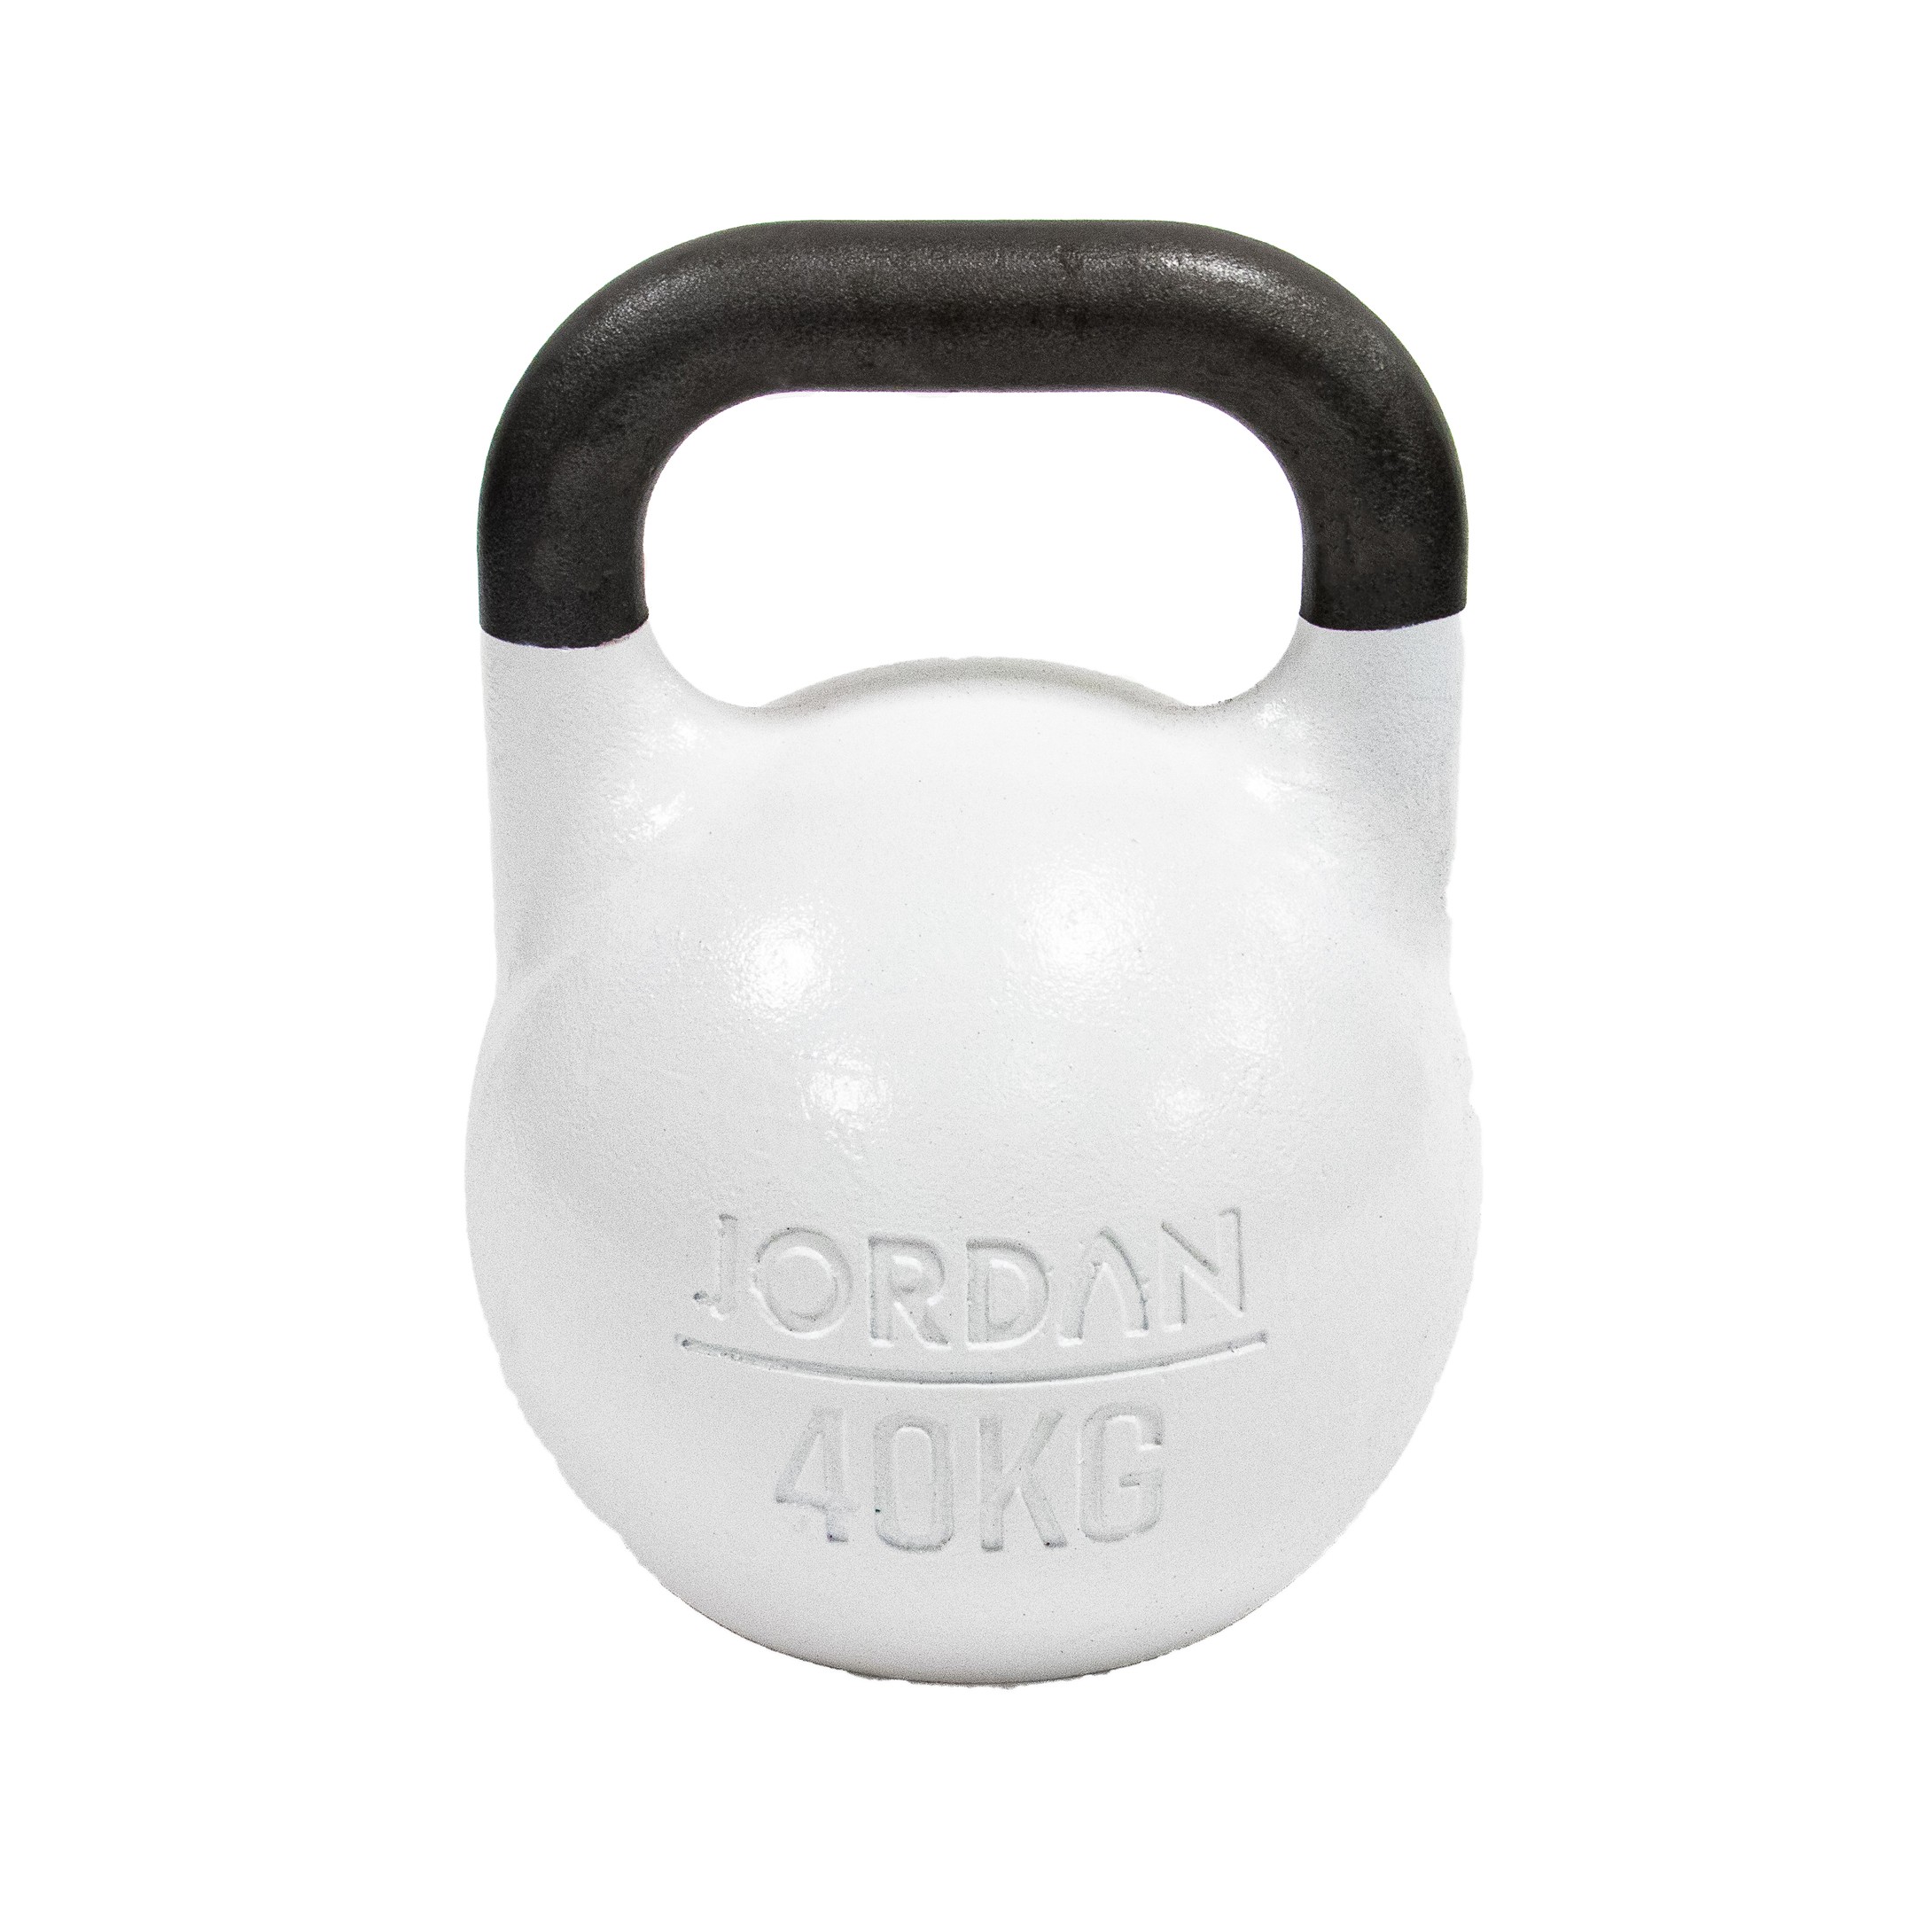 pit meesteres Peregrination 40kg Competition kettlebell - White (each) kopen? Ga voor kwaliteit |  AStepAhead - Competition Kettlebells - AStepAhead